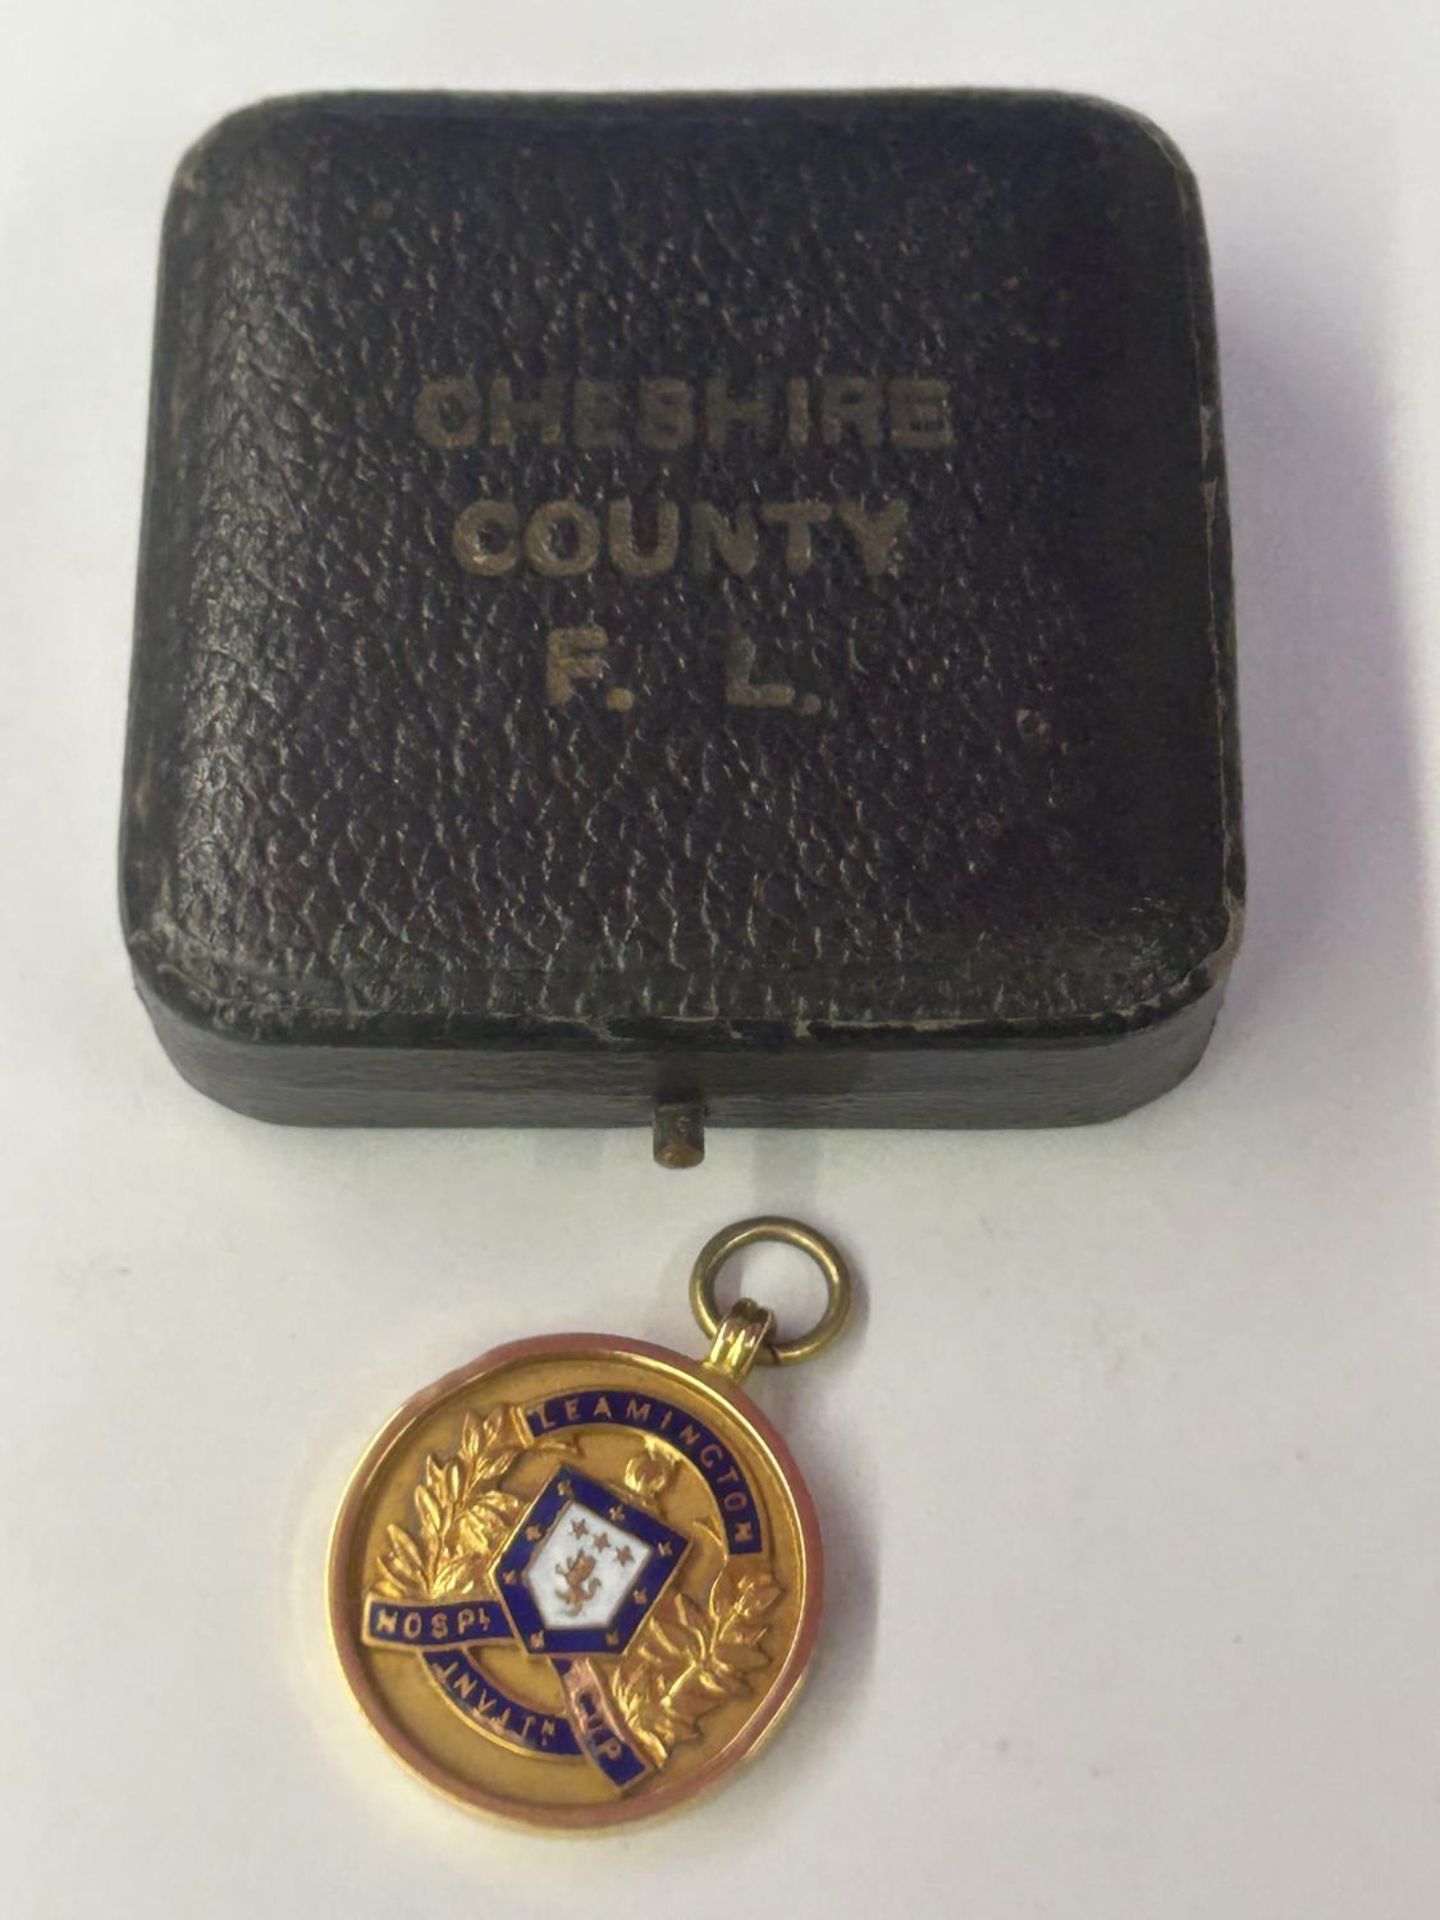 A HALLMARKED 9 CARAT GOLD & ENAMEL LEAMINGTON HOSPITALITY CUP WINNERS MEDAL 1936-1937 SEASON, BY - Image 5 of 5